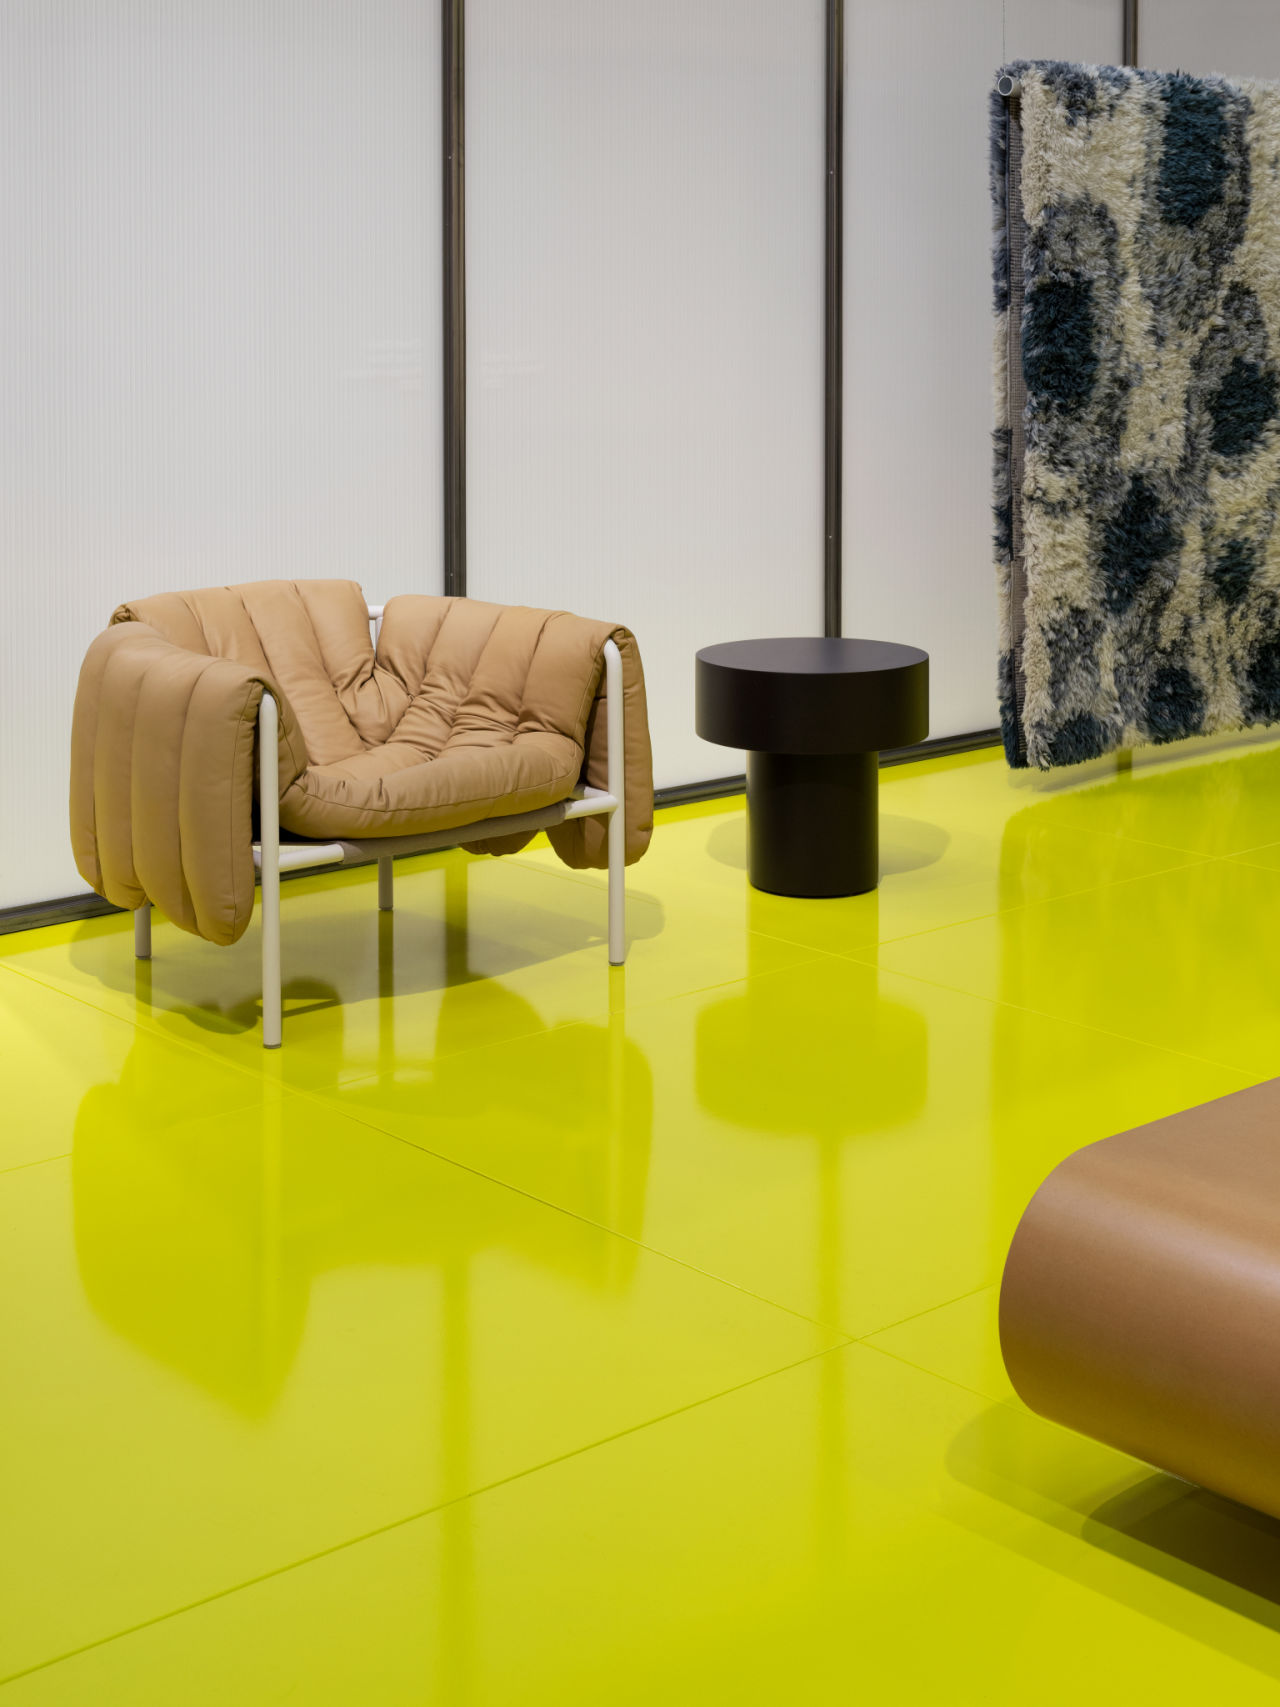 Image from the 2023 Stockholm Furniture Fair featuring Stump Side Table, Puffy Lounge Chair, and Monster Rug.